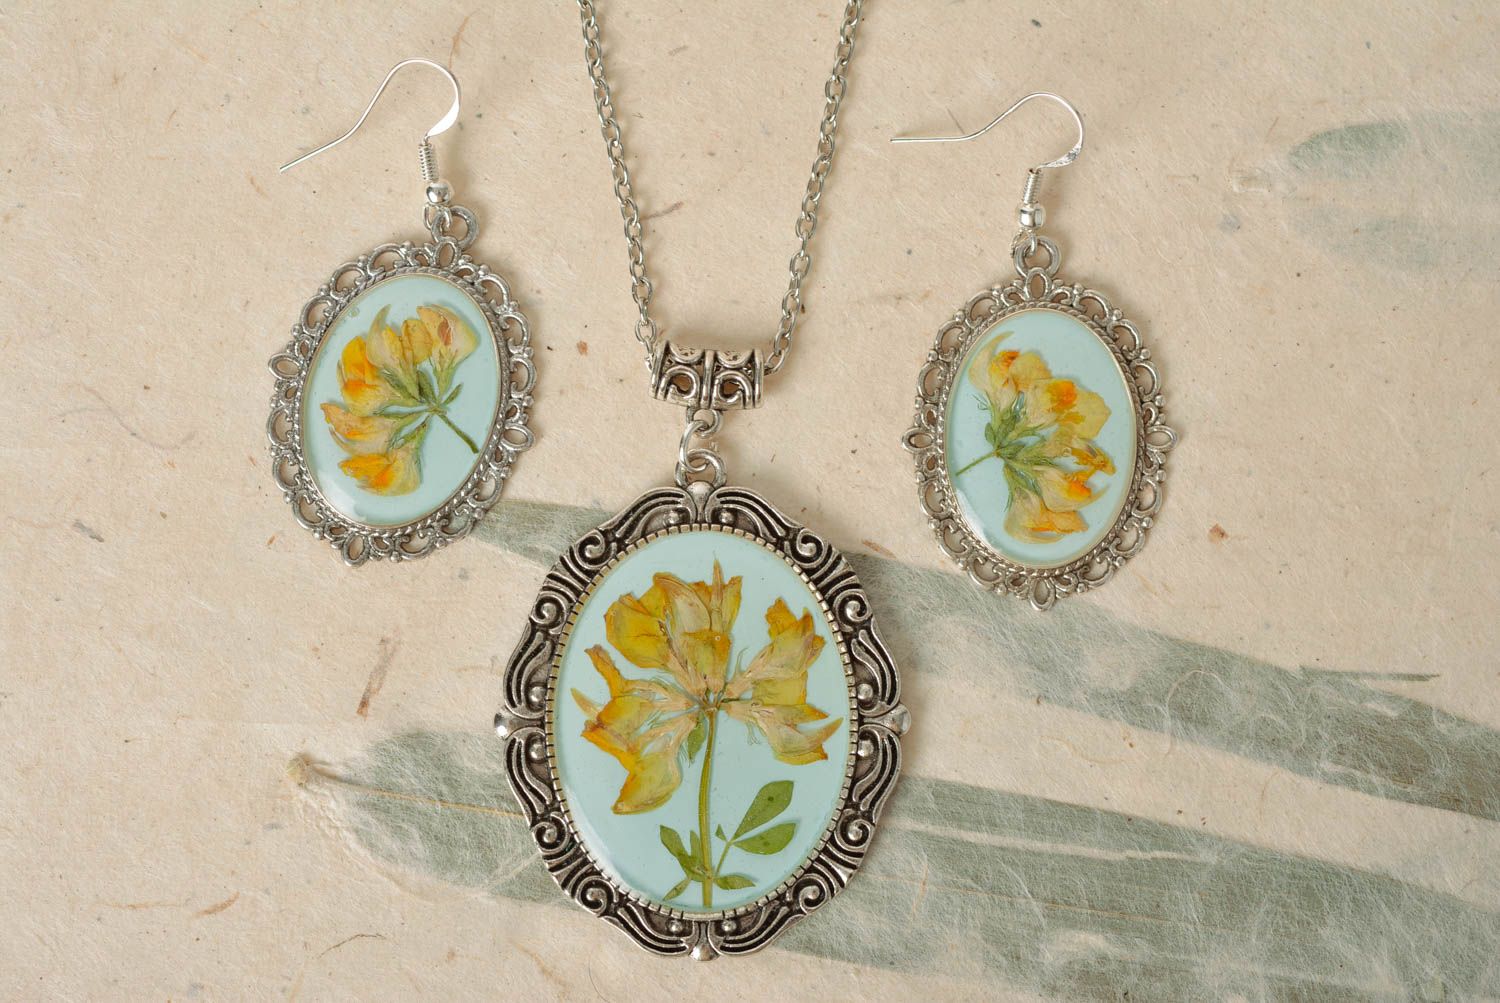 Handmade pendant and earrings jewelry set with real flowers and epoxy coating photo 1